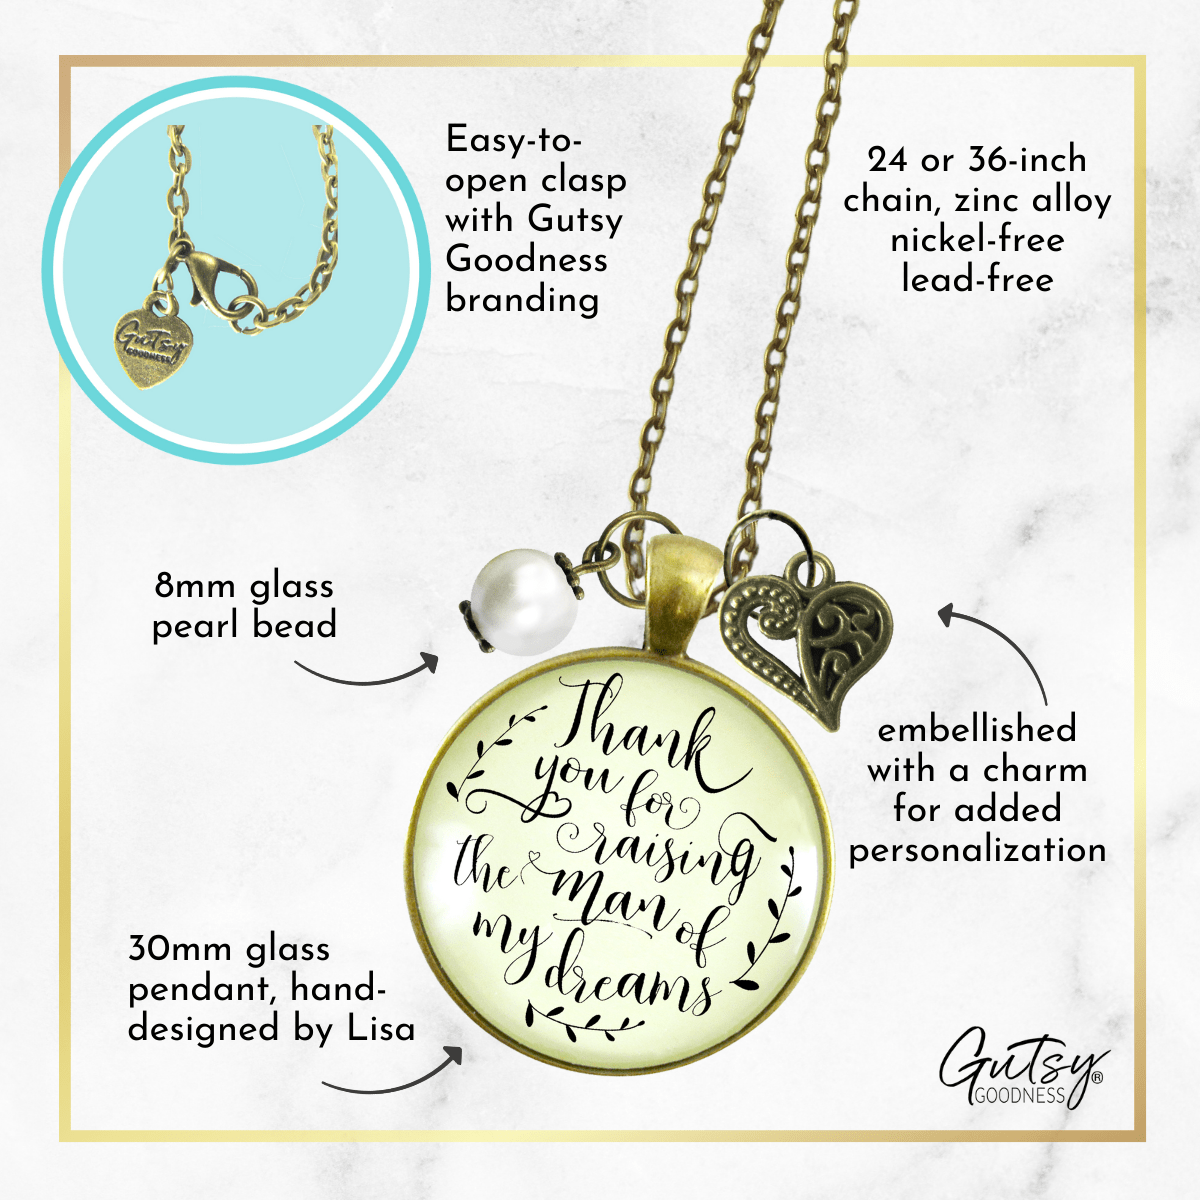 Gutsy Goodness To Her Mother in Law Necklace Thank You Raising Man I Dreamed Wedding Gift - Gutsy Goodness Handmade Jewelry;To Her Mother In Law Necklace Thank You Raising Man I Dreamed Wedding Gift - Gutsy Goodness Handmade Jewelry Gifts